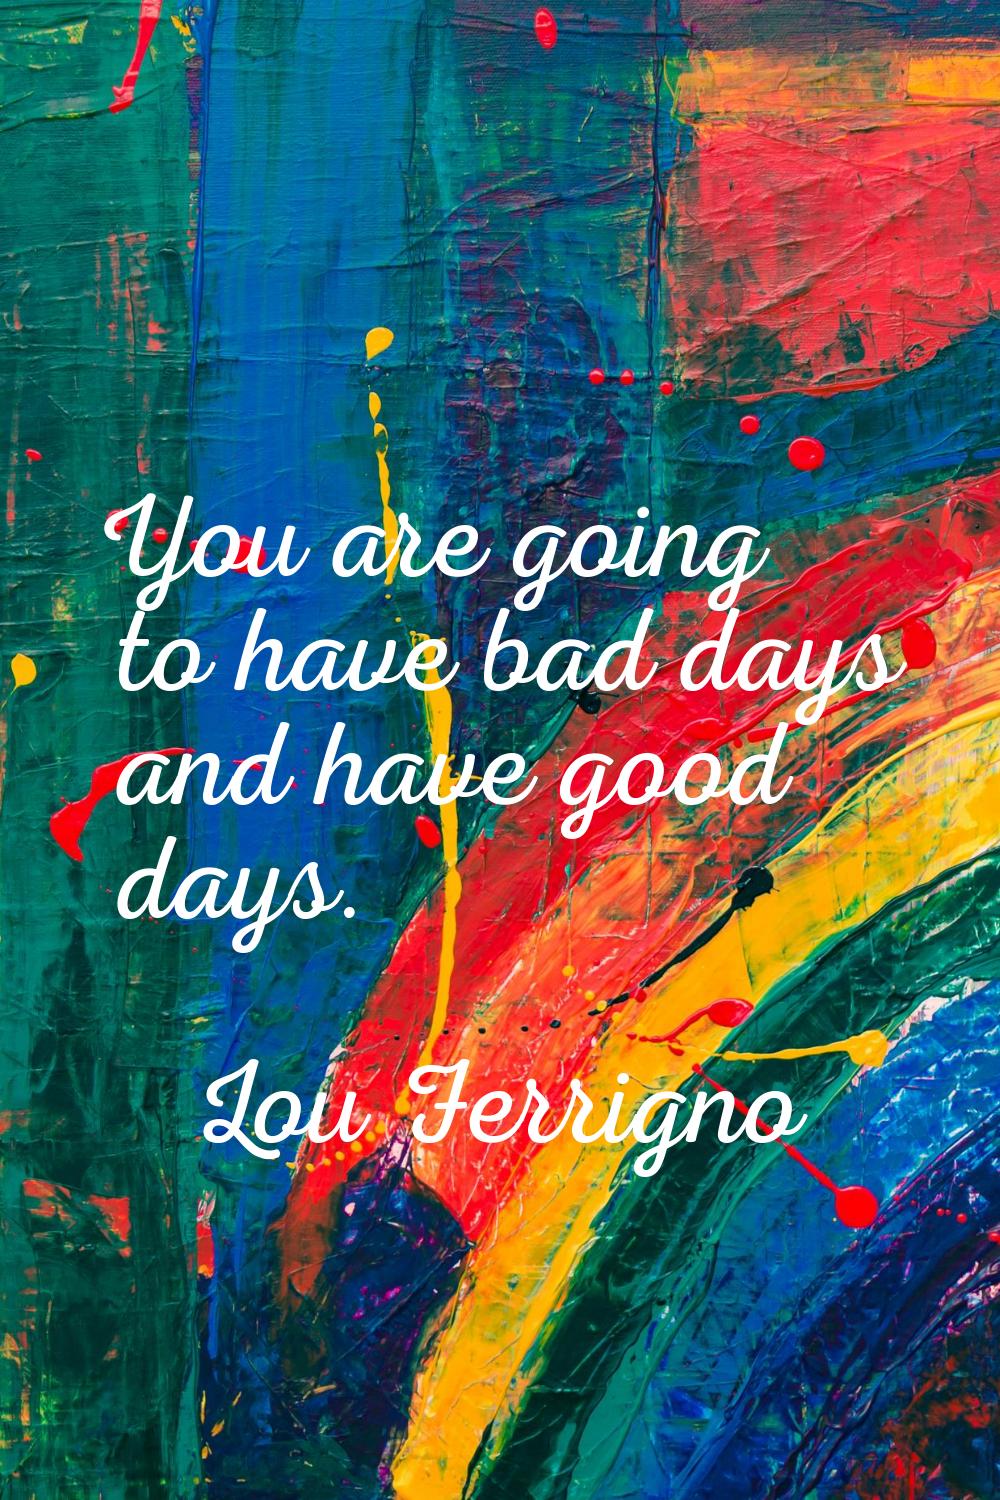 You are going to have bad days and have good days.